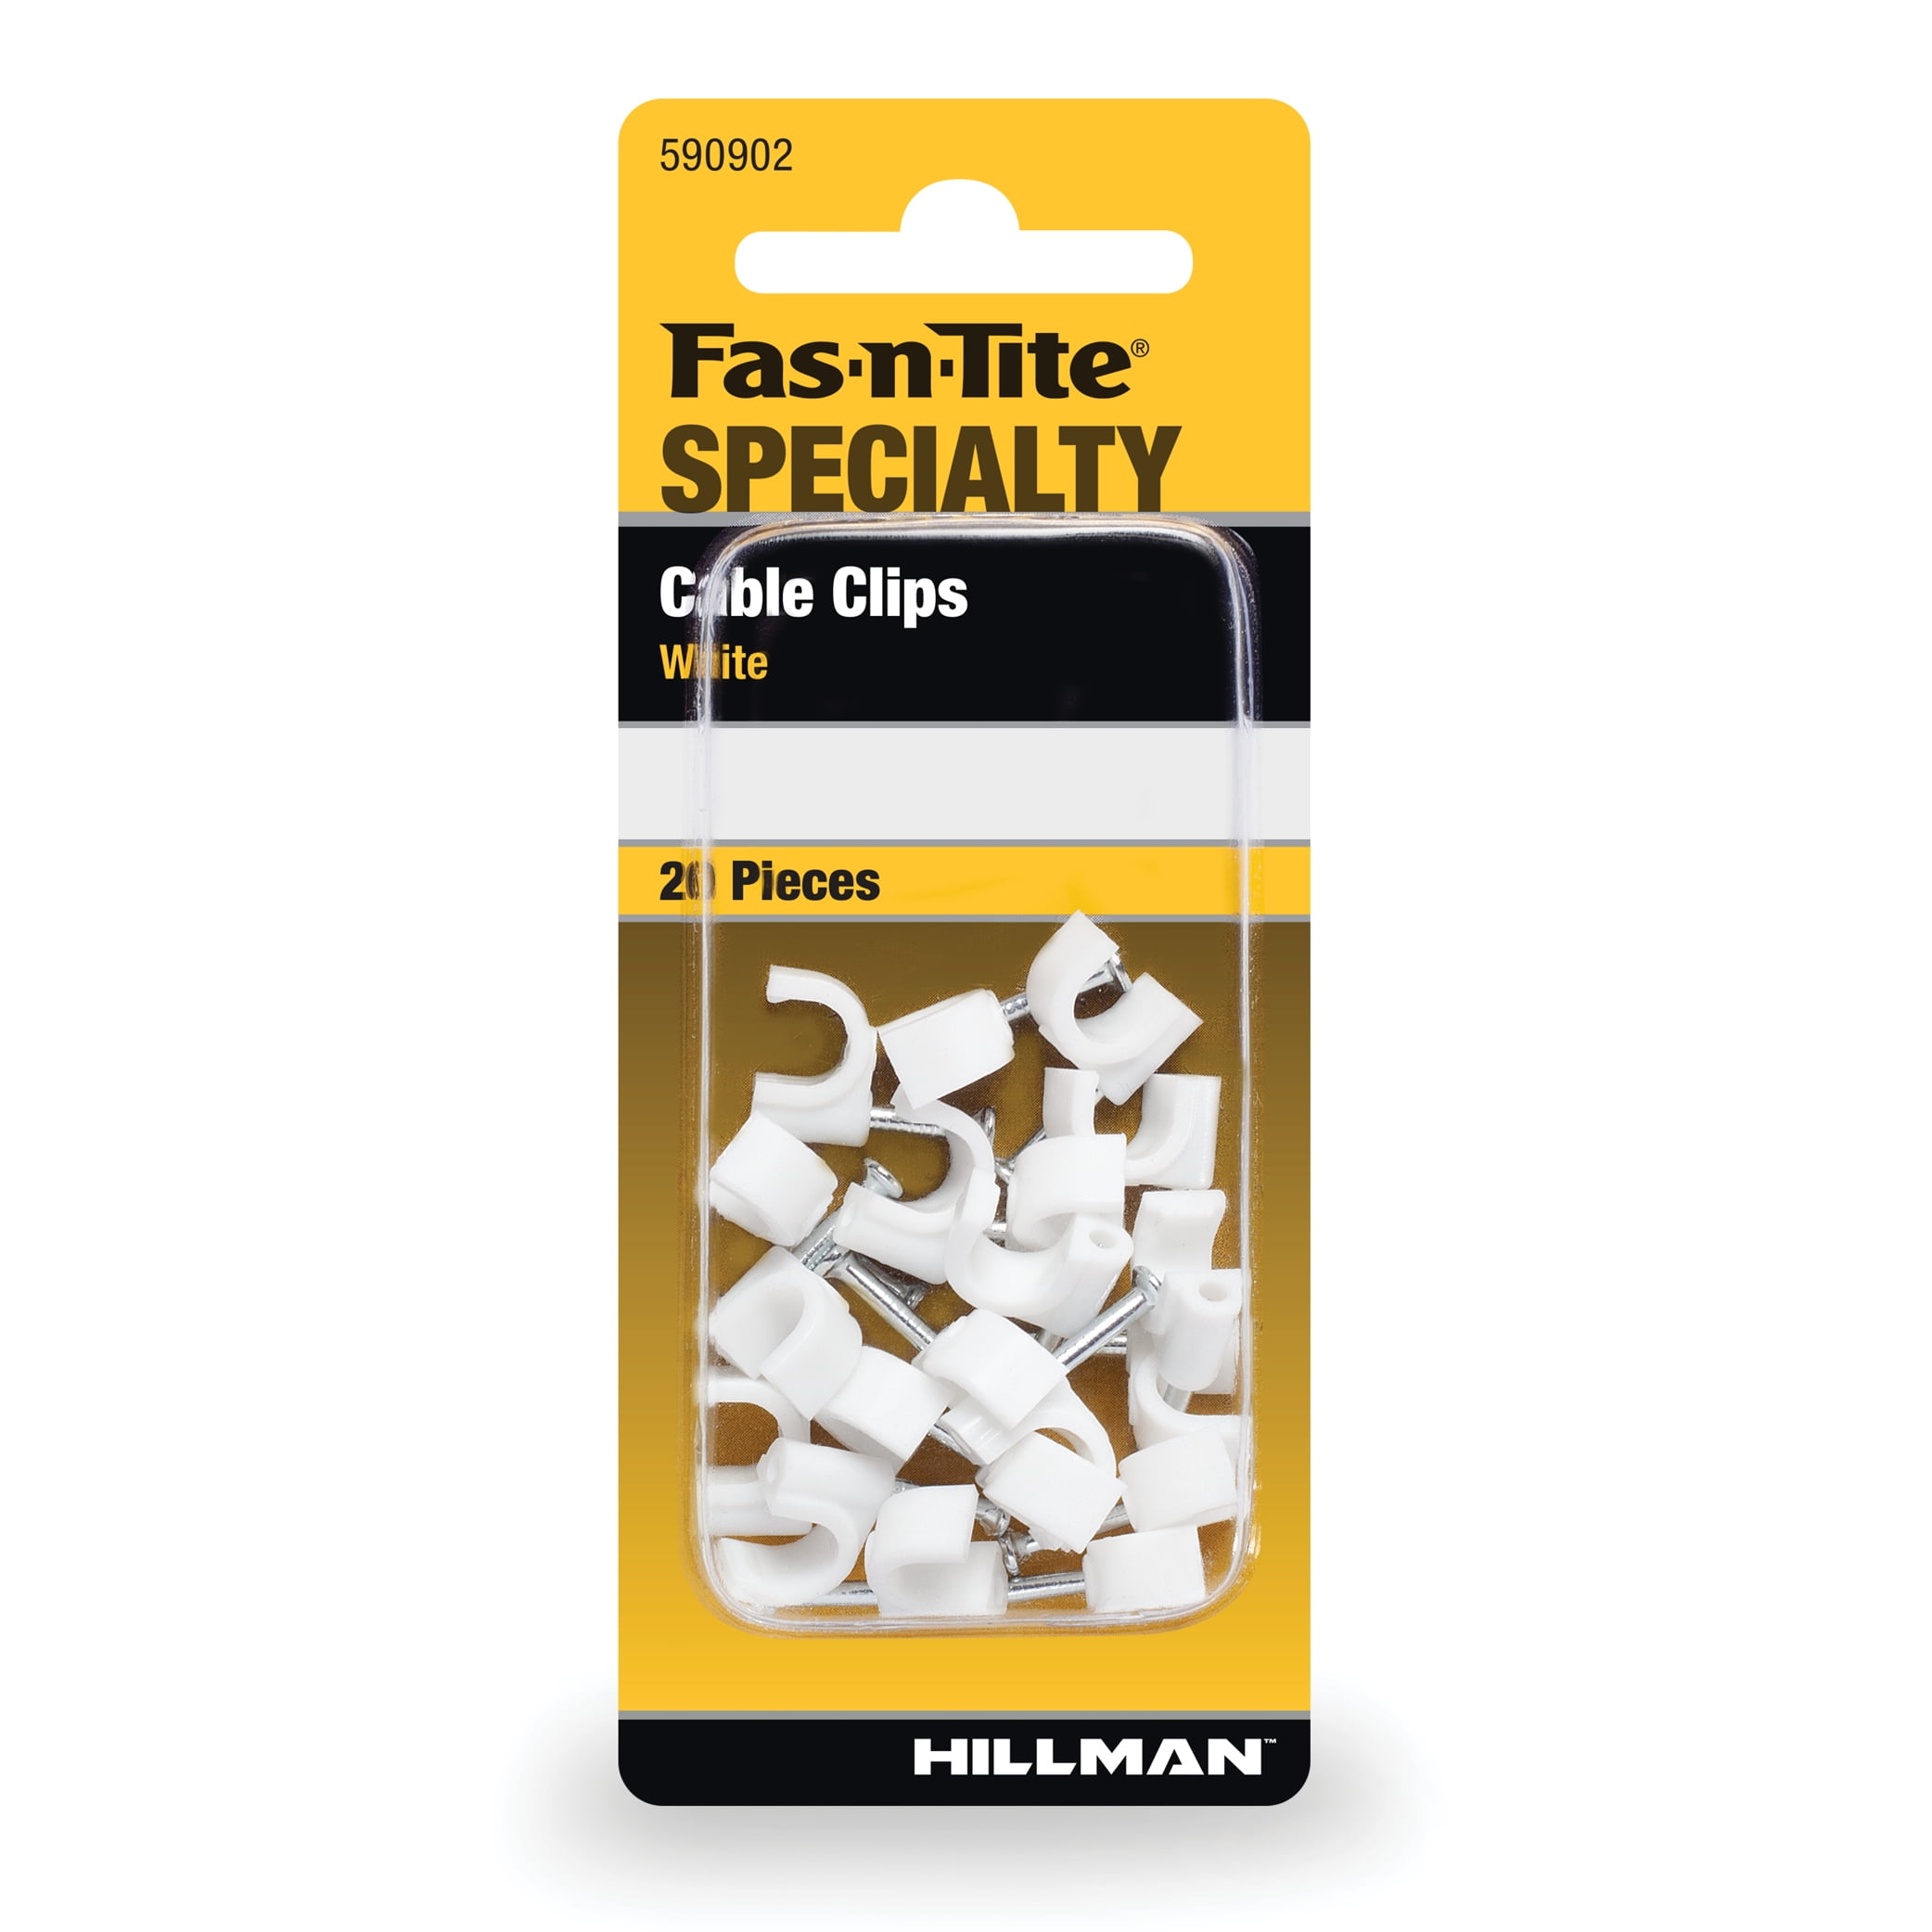 The Hillman Group, Fas-n-Tite Specialty Cable Clips, Nylon White Clips, M5 Diameter, 20 Pieces